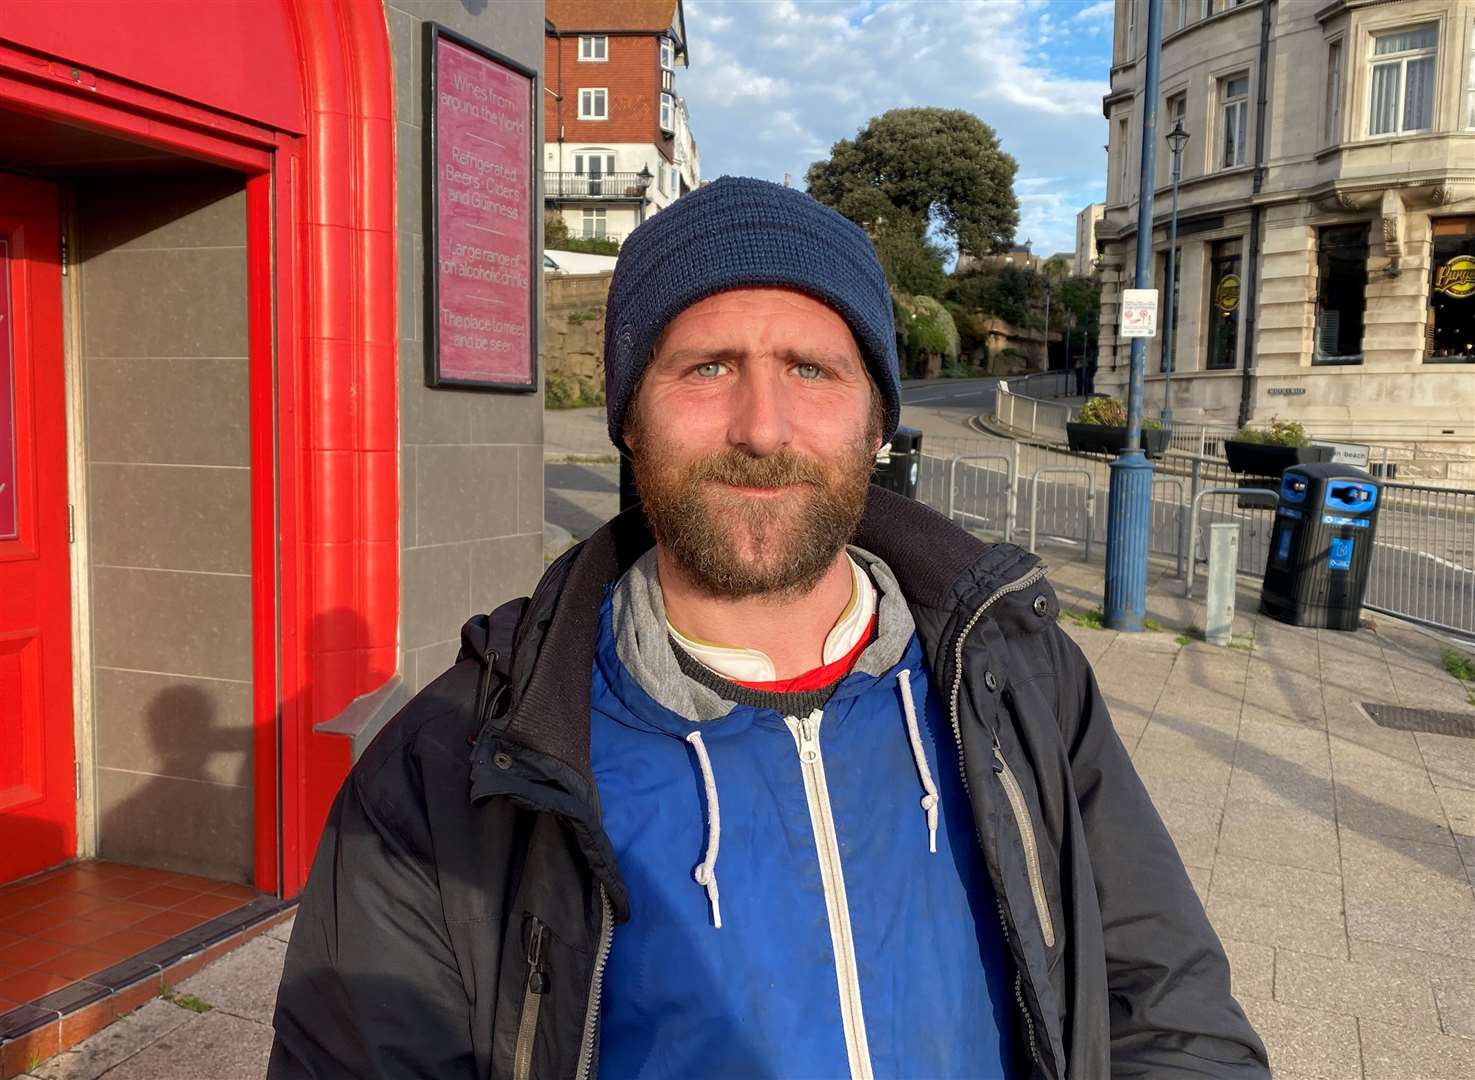 Alan Thatcher, 33, says he feels safe in Thanet